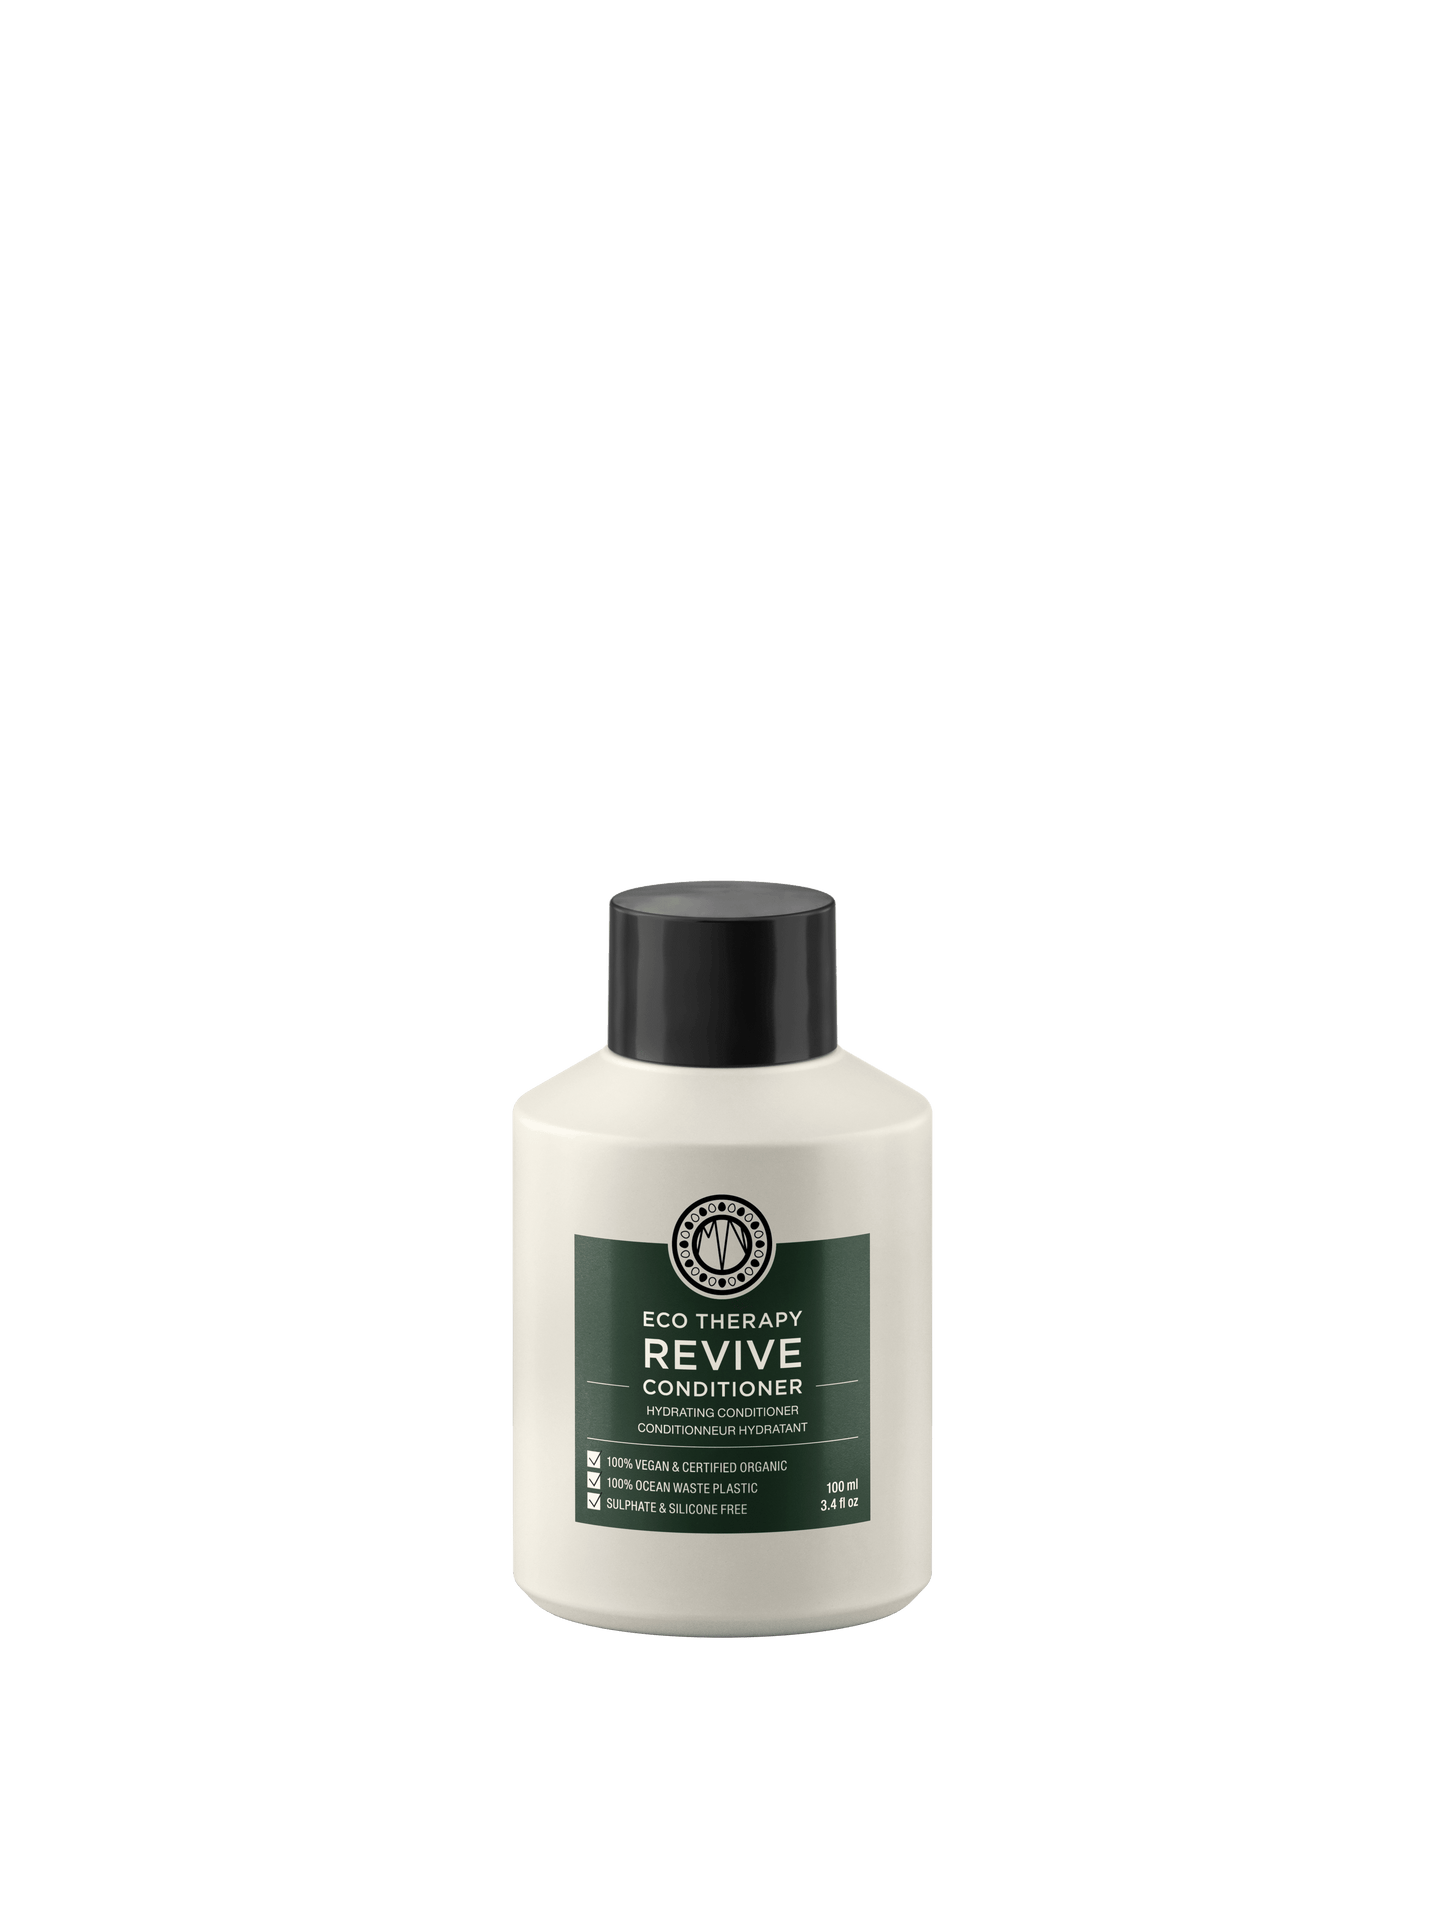 Eco Therapy Revive Conditioner - The Coloroom 